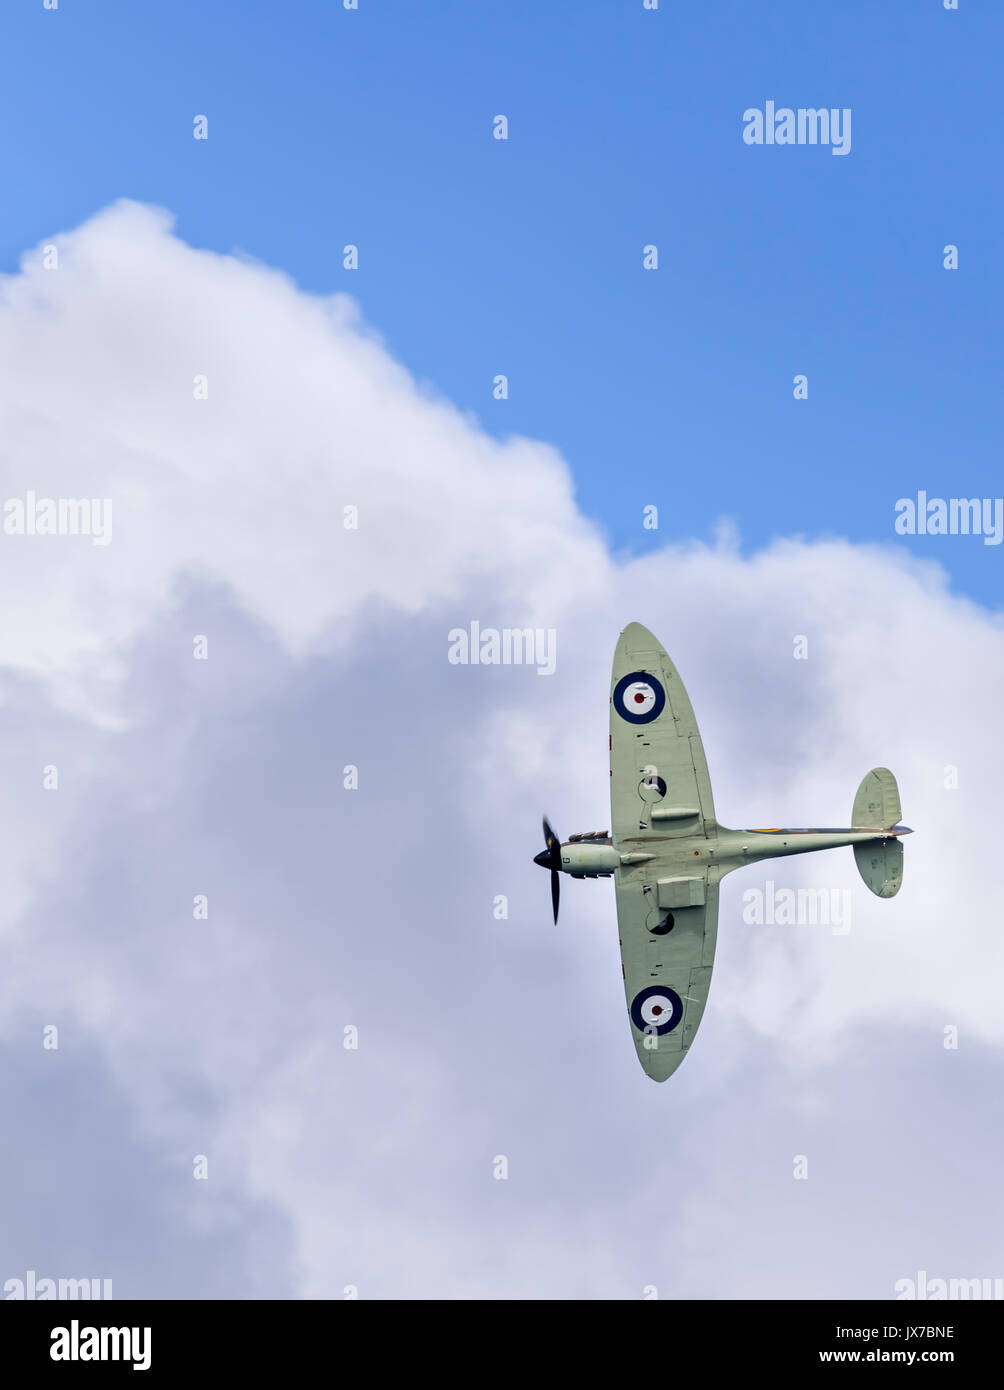 The Battle of Britain Memorial Flight's Spitfire P7350 (F Mk IIa) banking hard right towards cloud cover Stock Photo